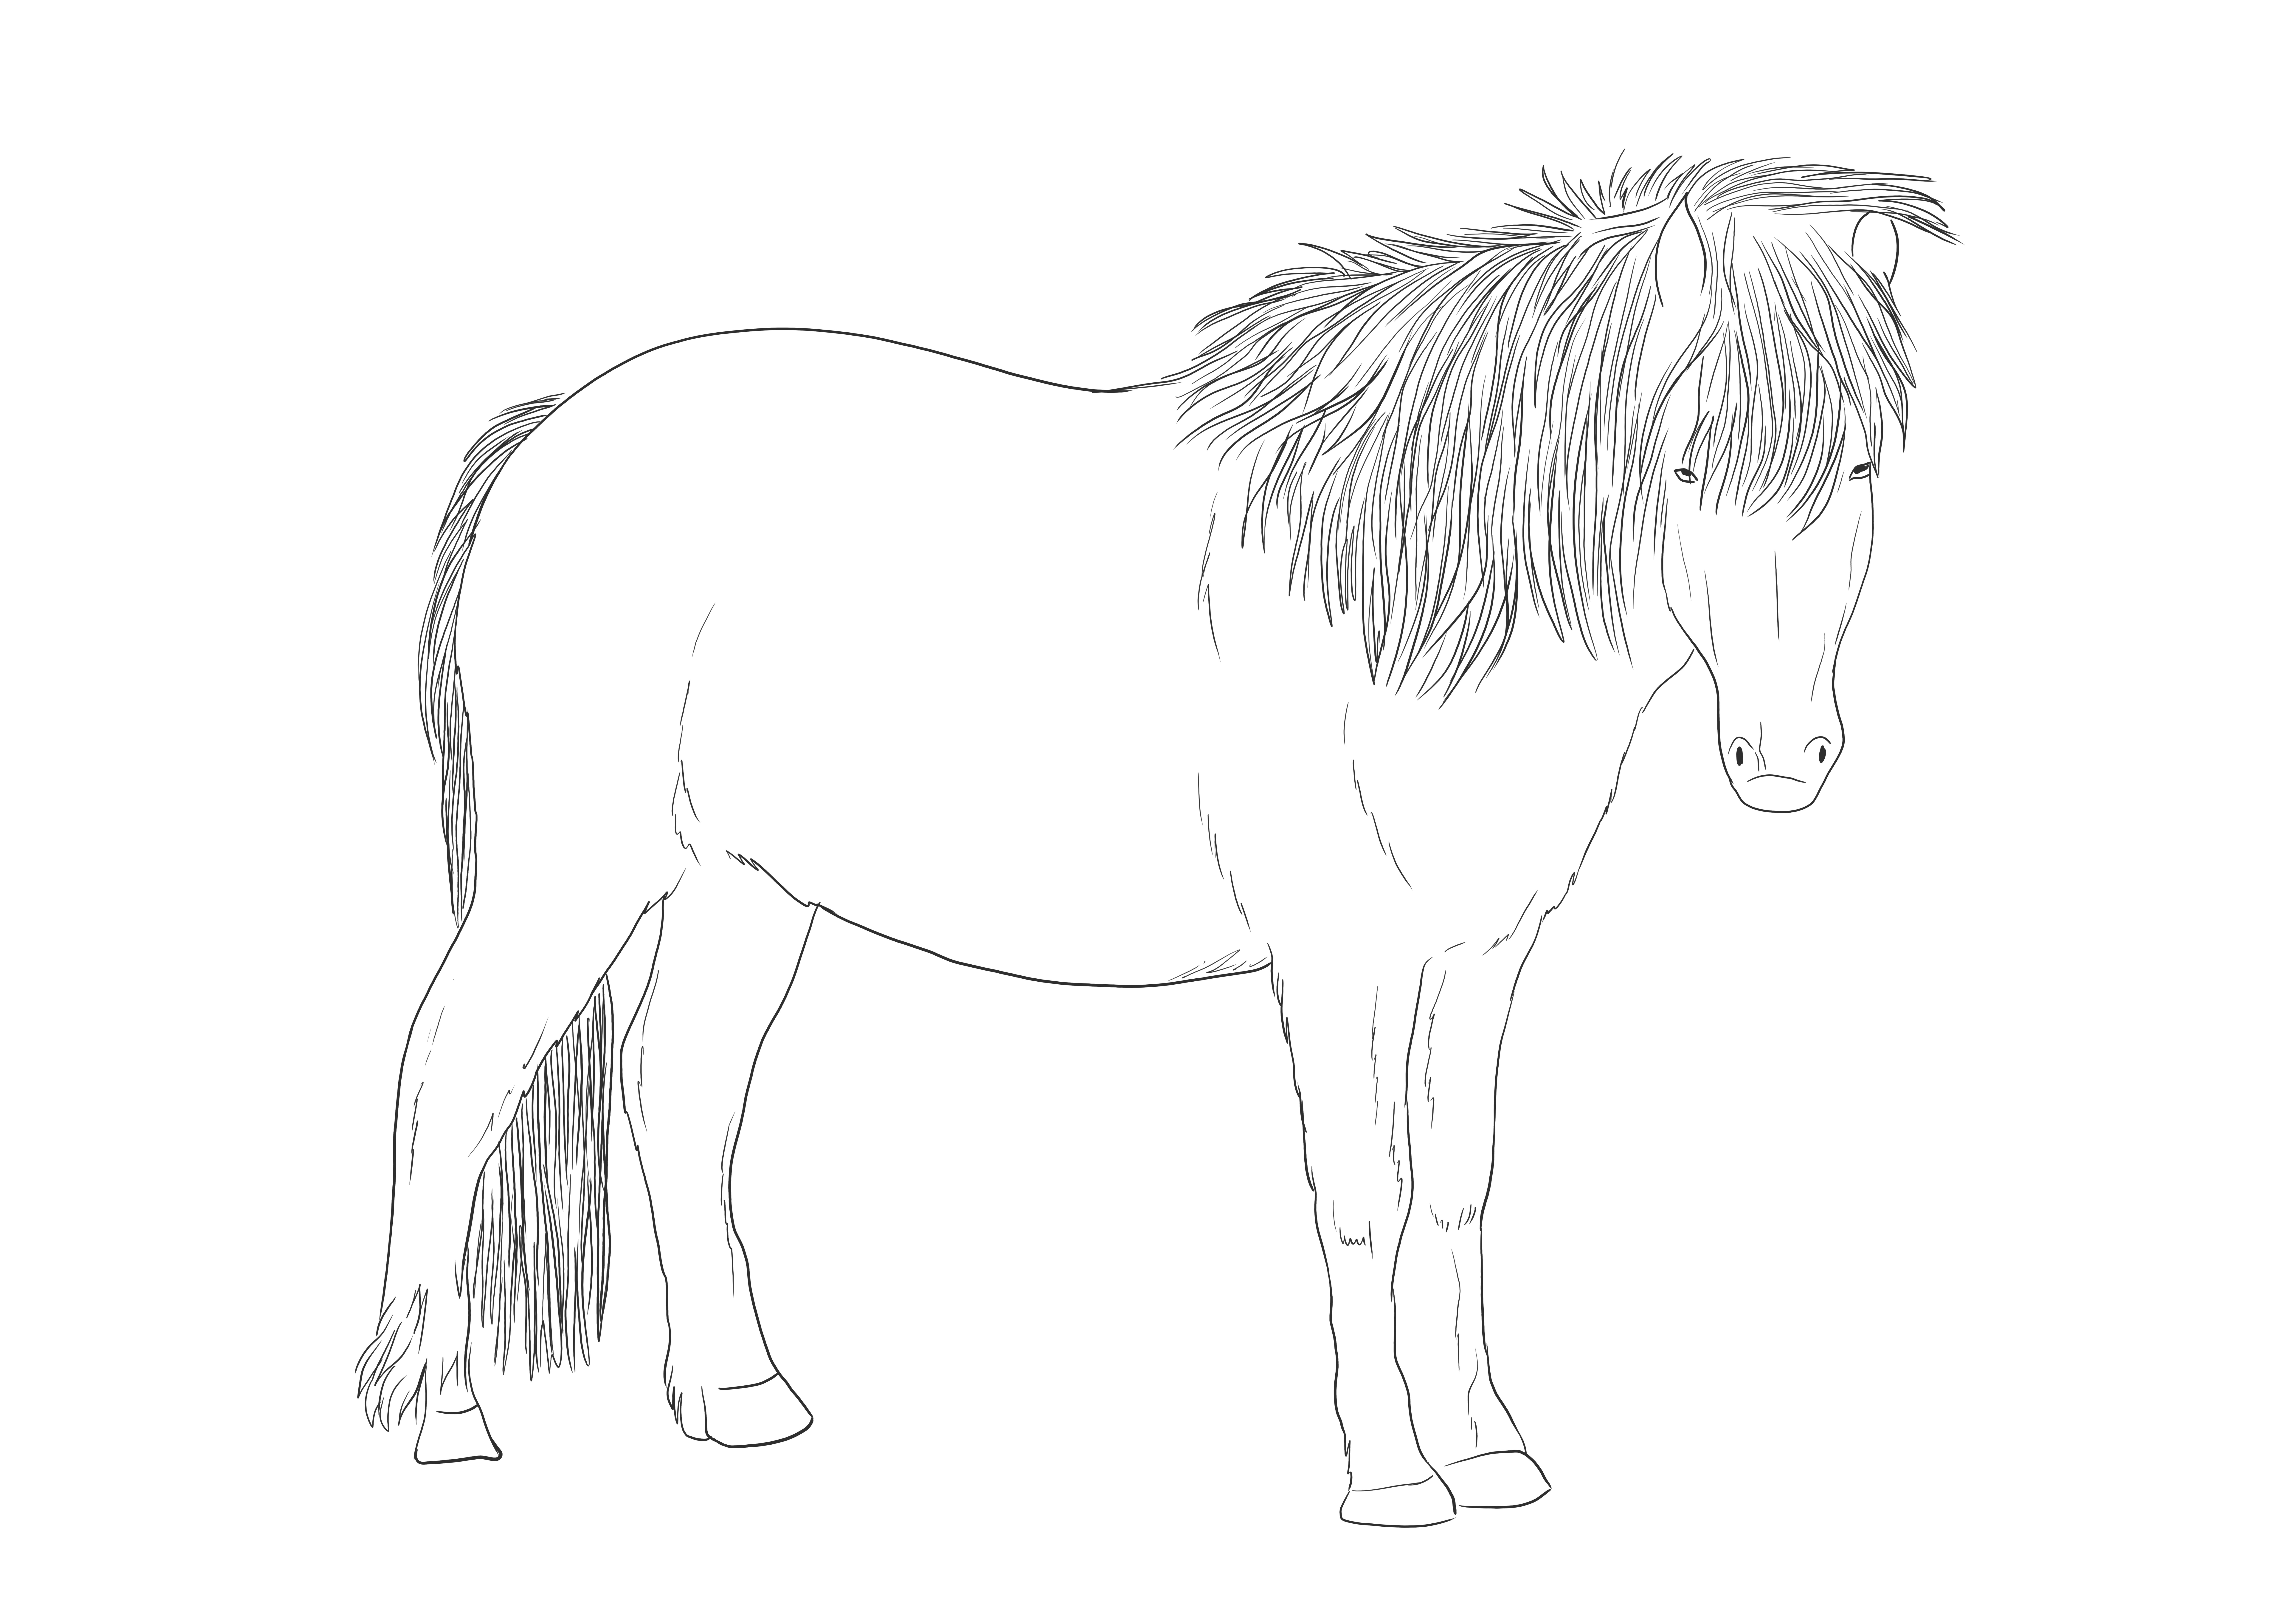 Icelandic Horse printing coloring picture for free use